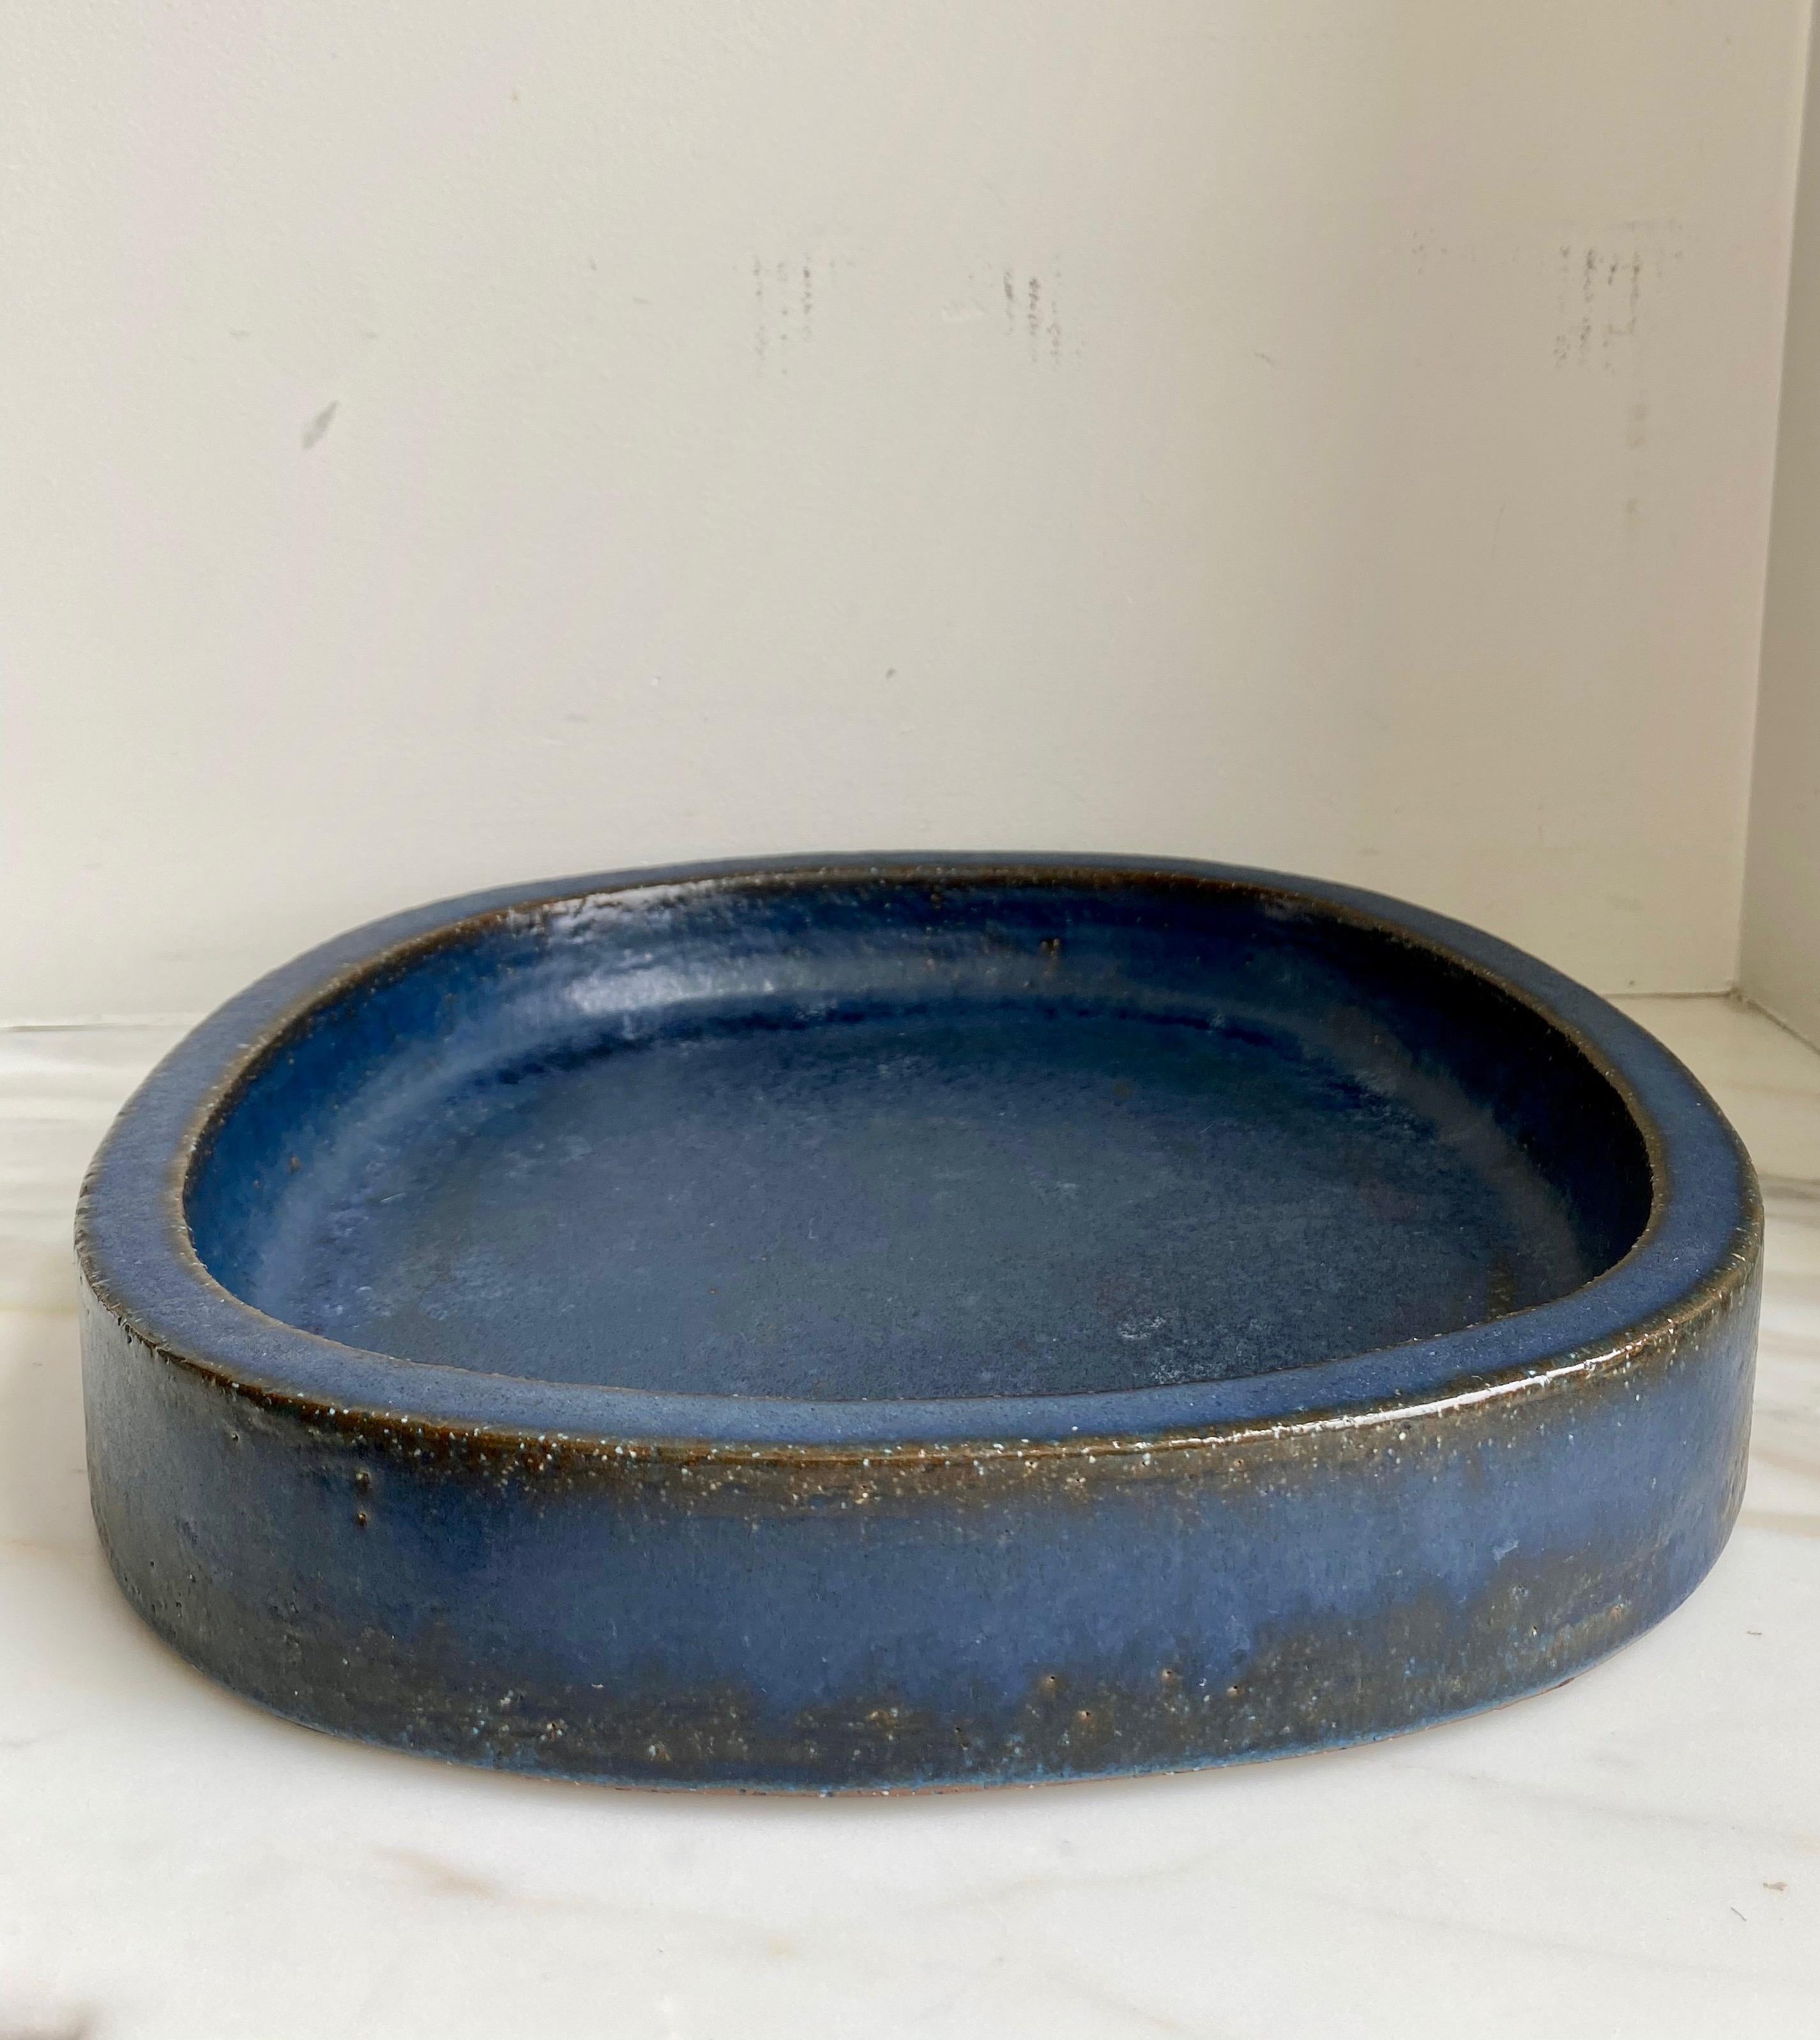 Stoneware dish with indigo glaze by Per Linnemann-Schmidt for Palshus

Per Linnemann-Schmidt and his wife Annelise Linnemann-Schmidt opened the Palshus studio west of Copenhagen in 1947. This dish is made of Chamotte or textured clay and has a